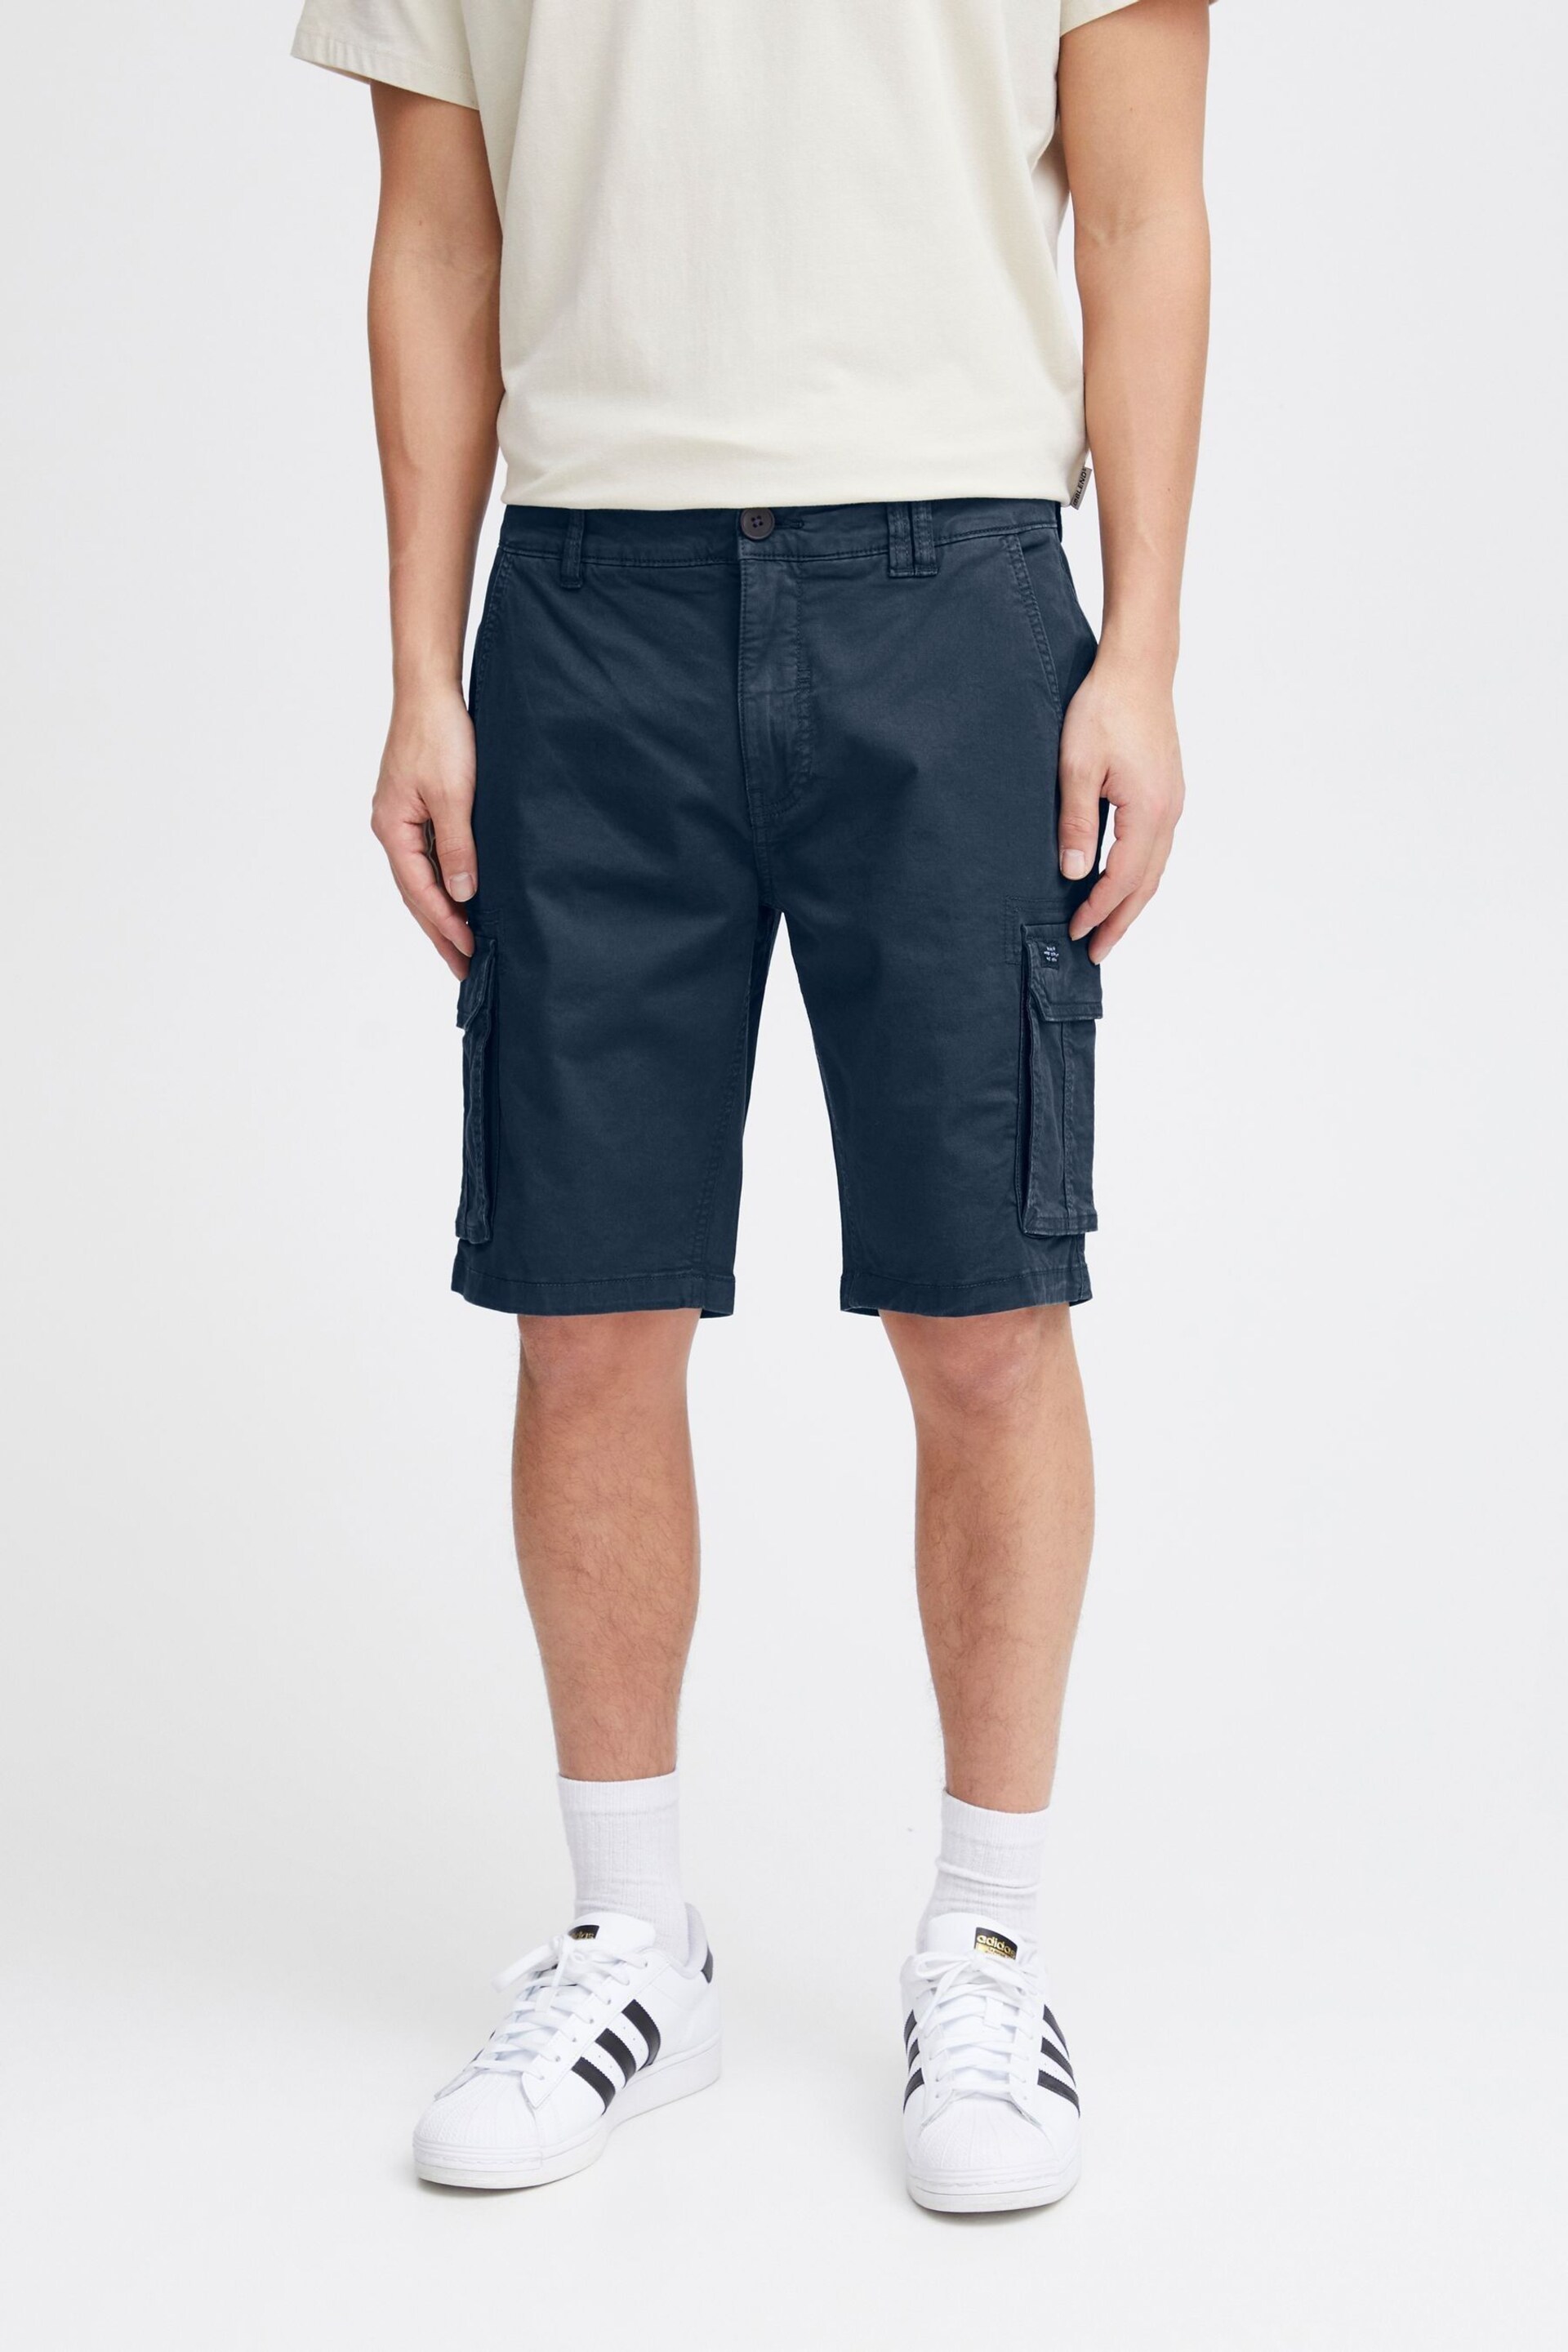 Blend Blue Stretch Cargo Shorts - Image 1 of 5